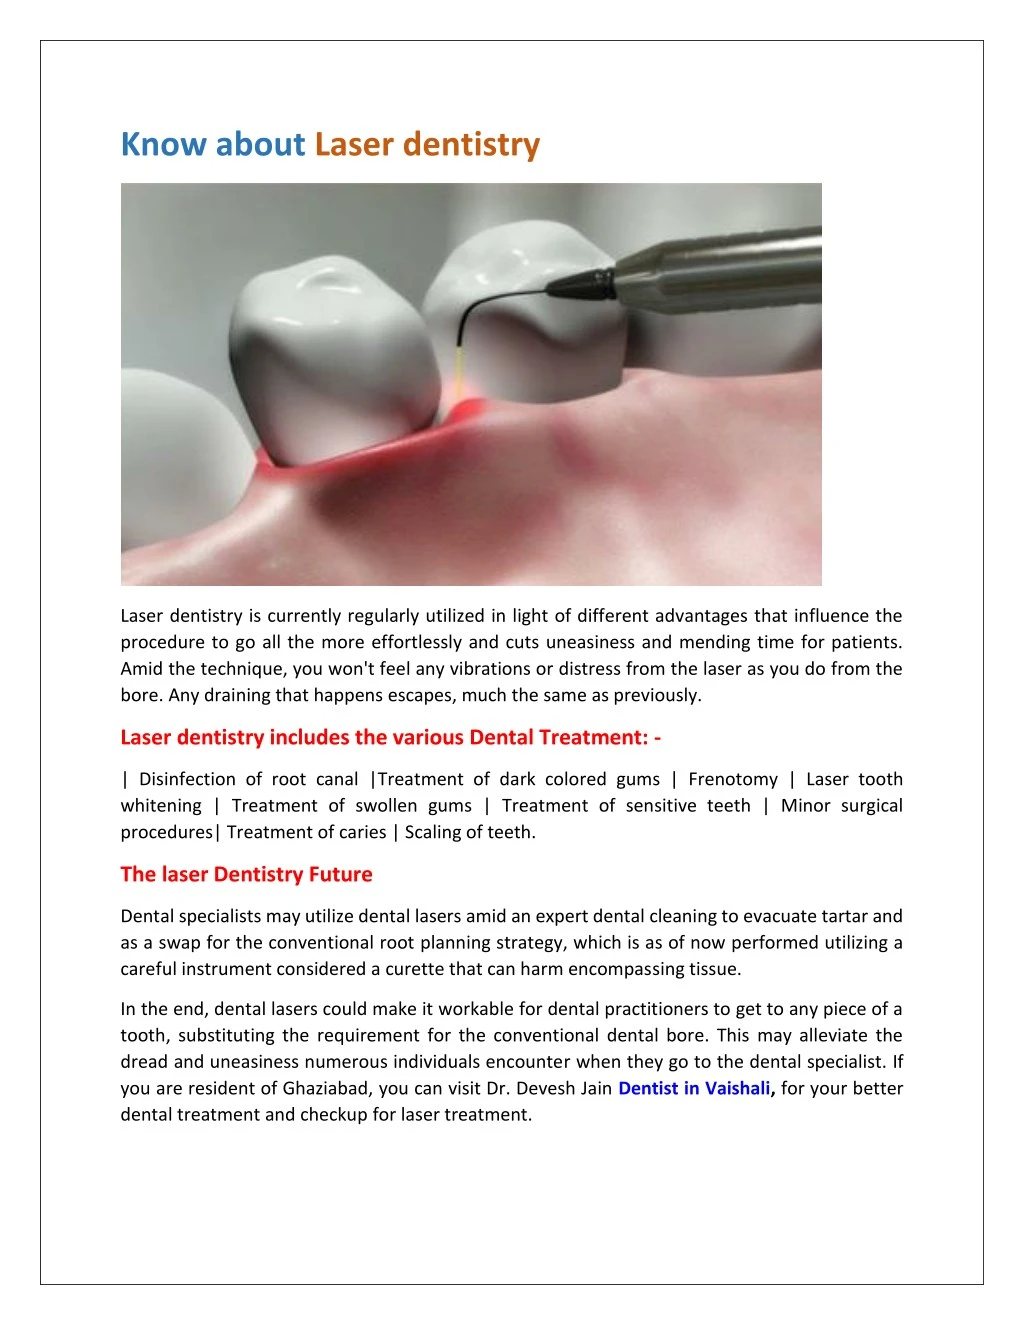 know about laser dentistry